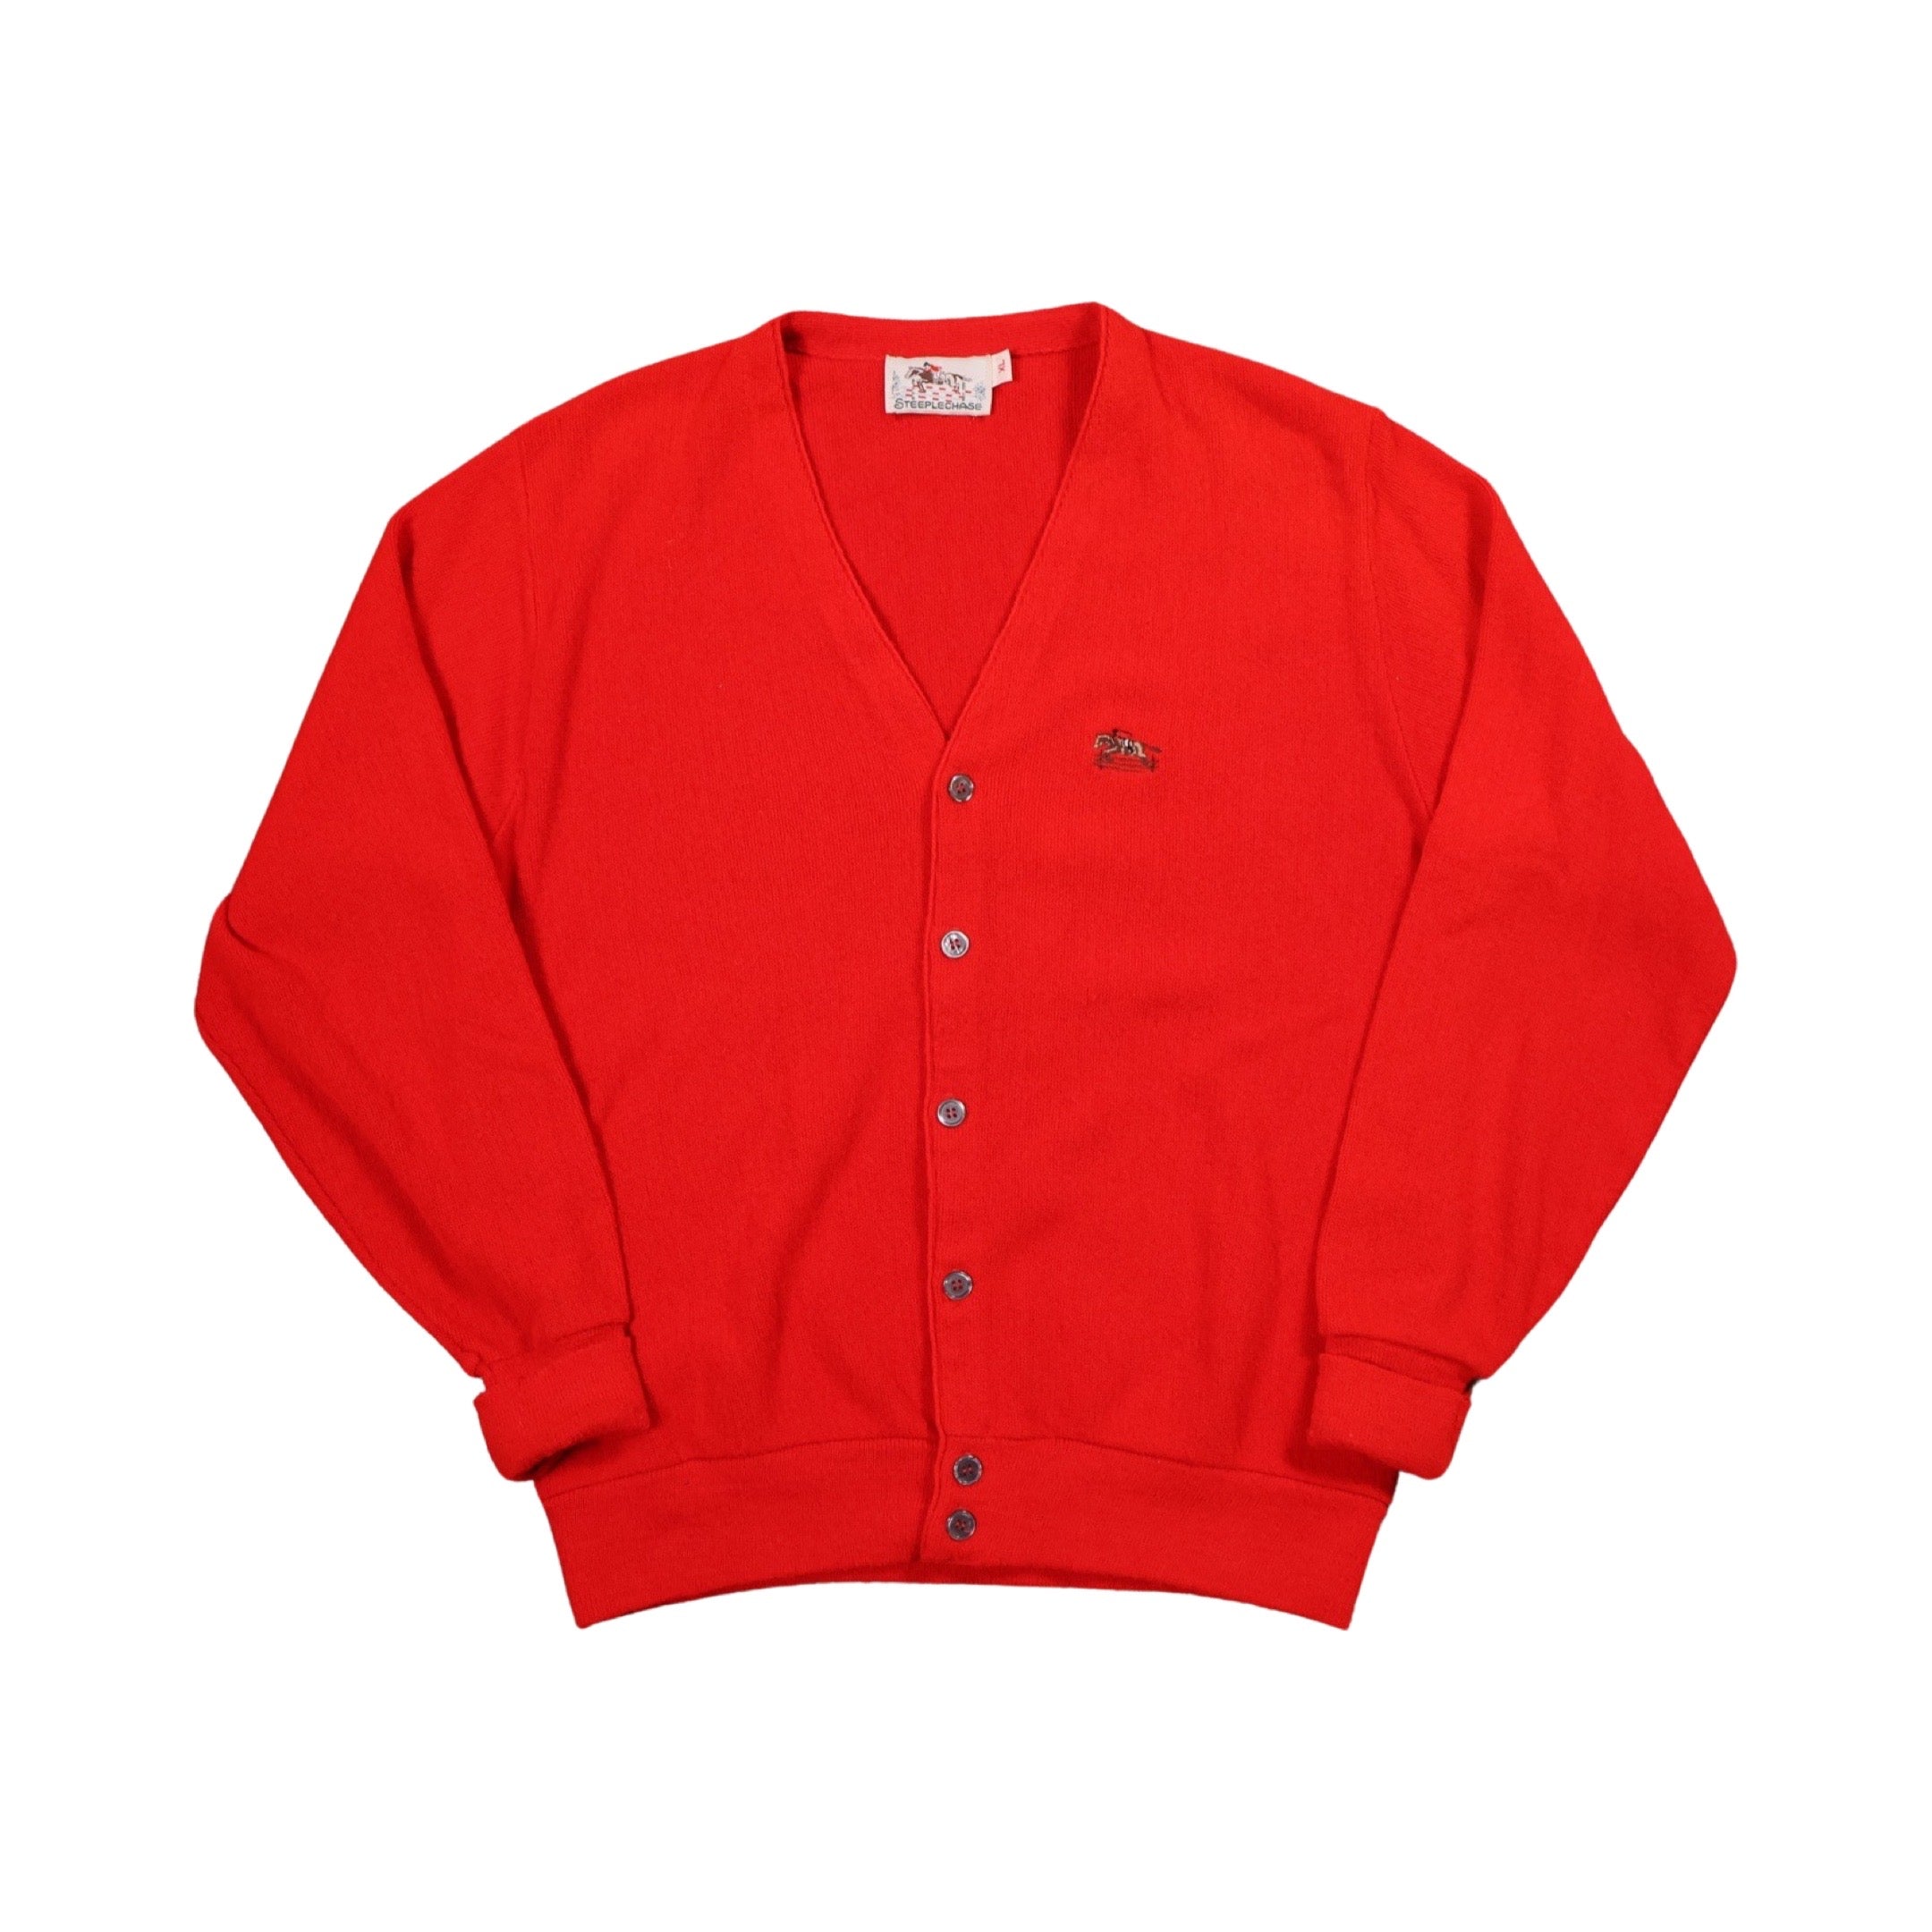 Red 90s Cardigan (Large)